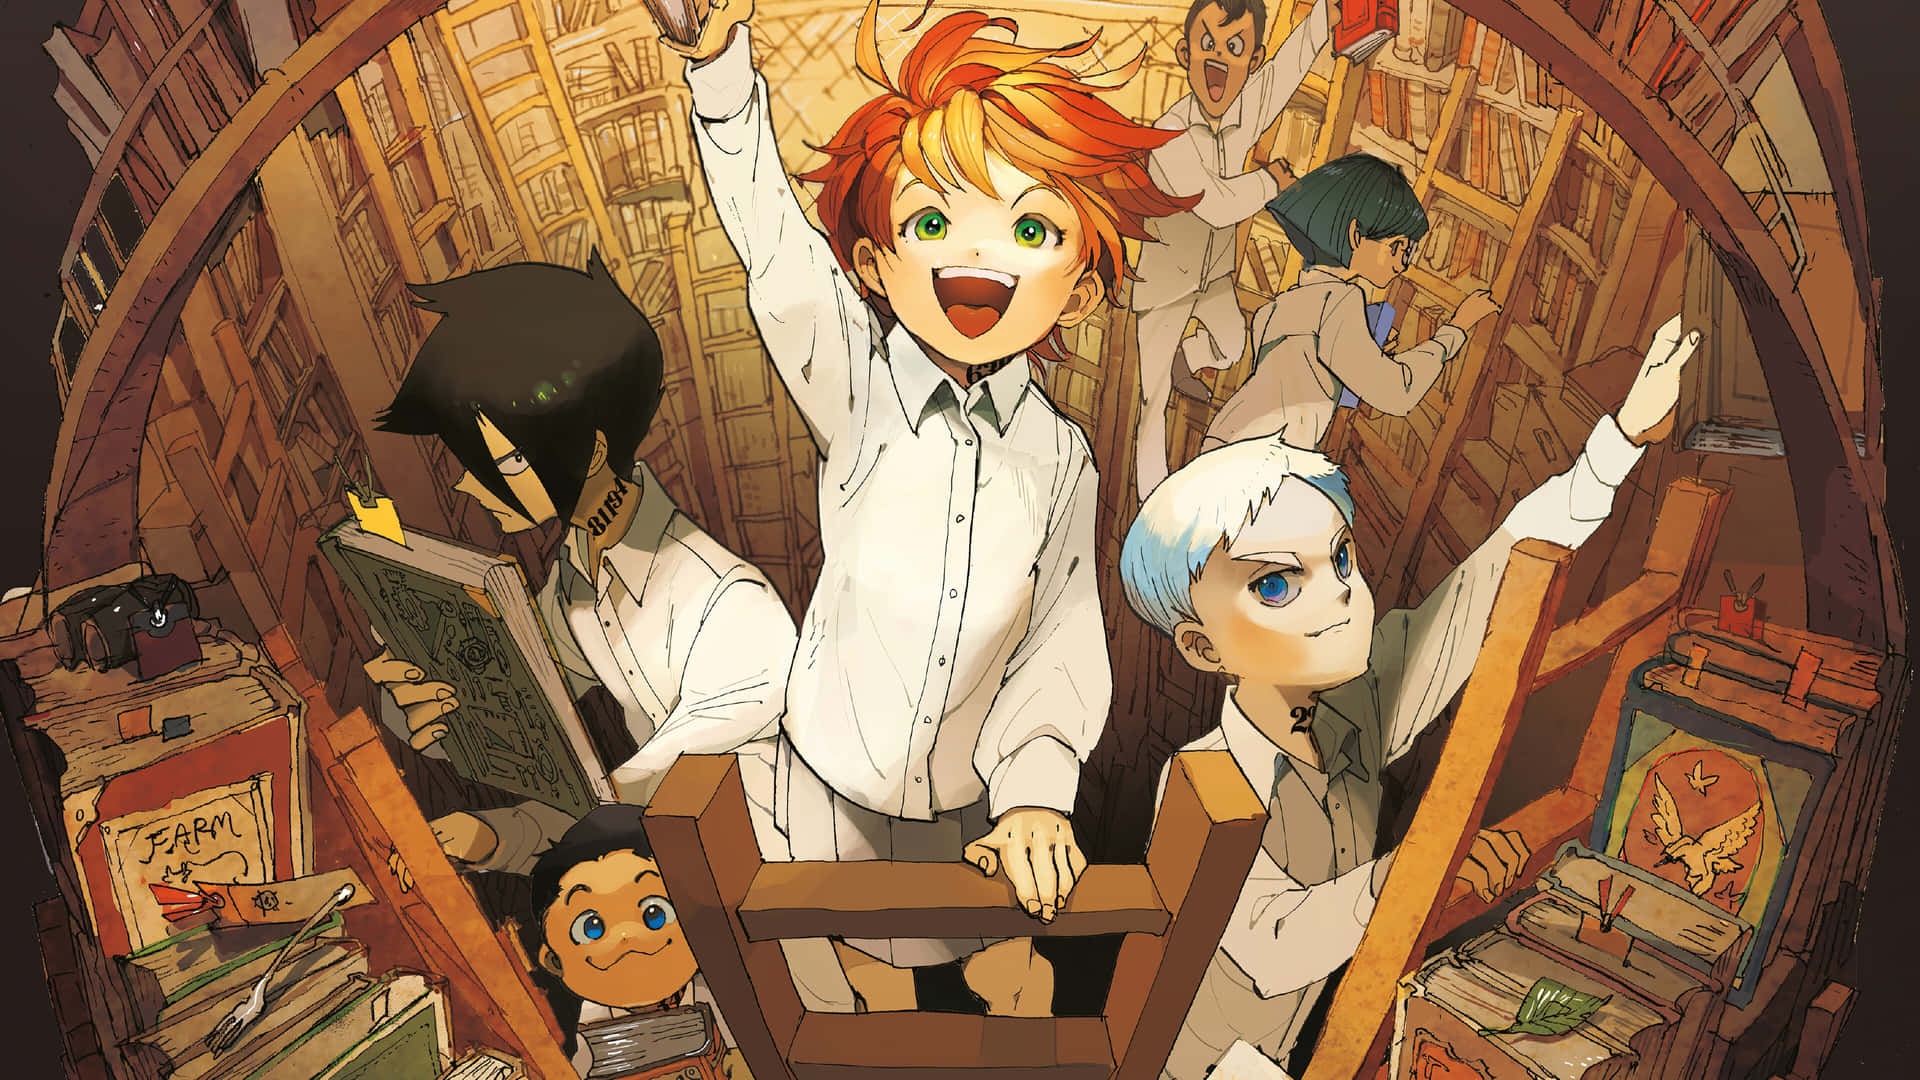 Emma and Ray of “The Promised Neverland” stand in the spotlight Wallpaper